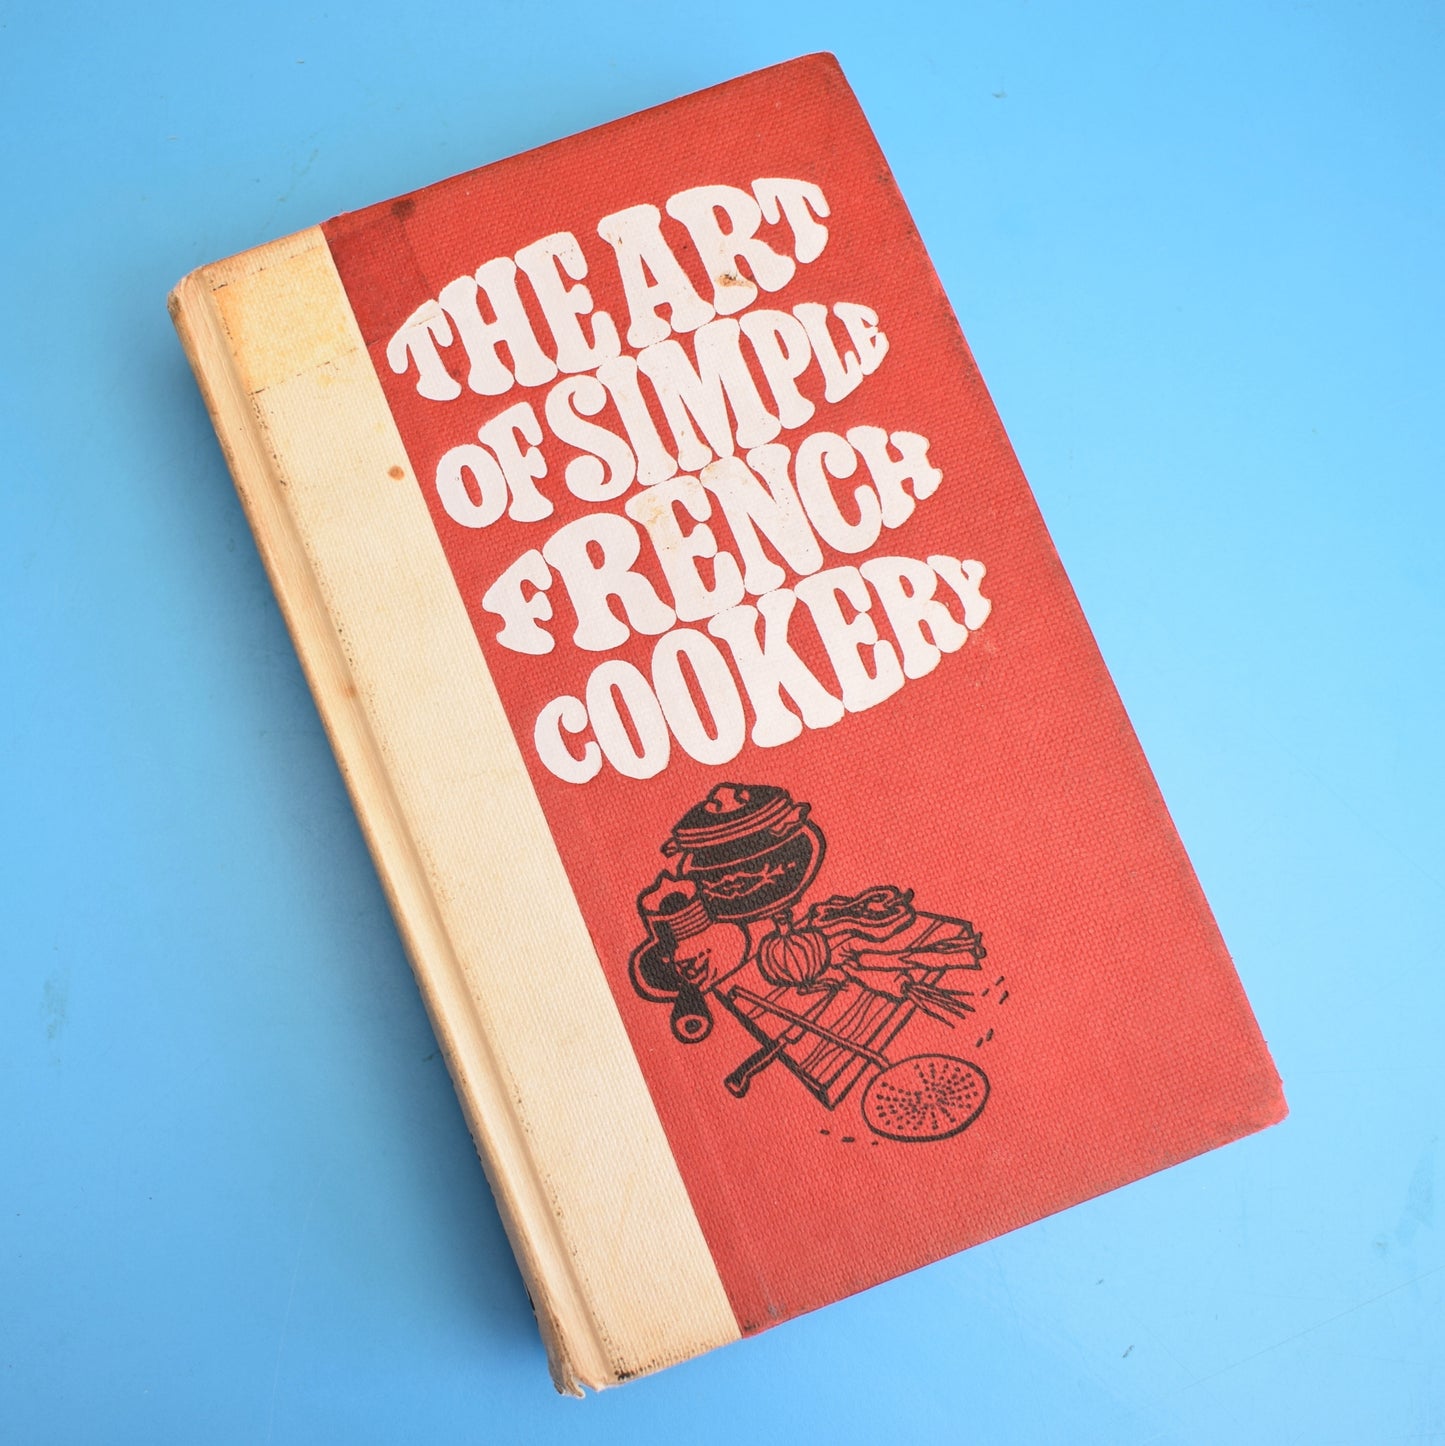 Vintage 1960s Book - The Art of French Cookery